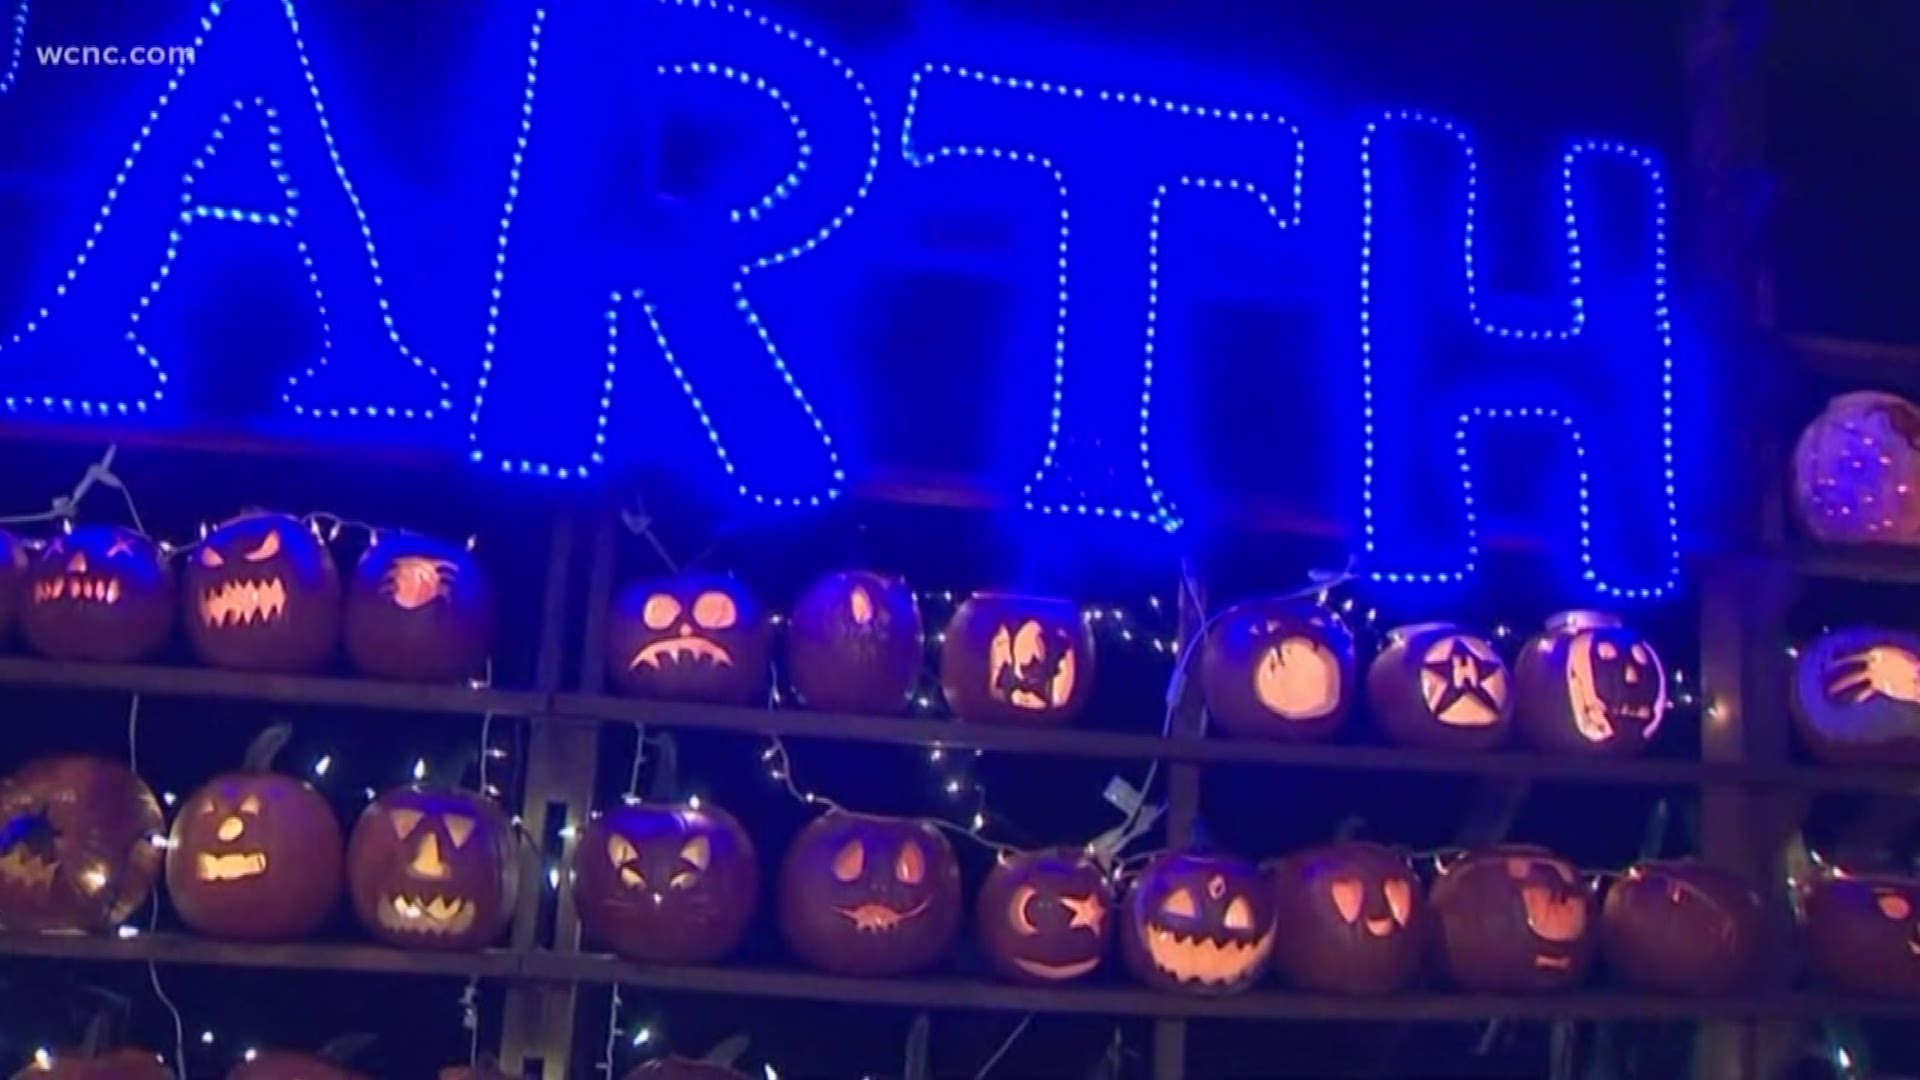 It's a Charlotte Halloween tradition; the Great Pumpkin Wall in Elizabeth, where over 100 pumpkins light up the street with a special message.